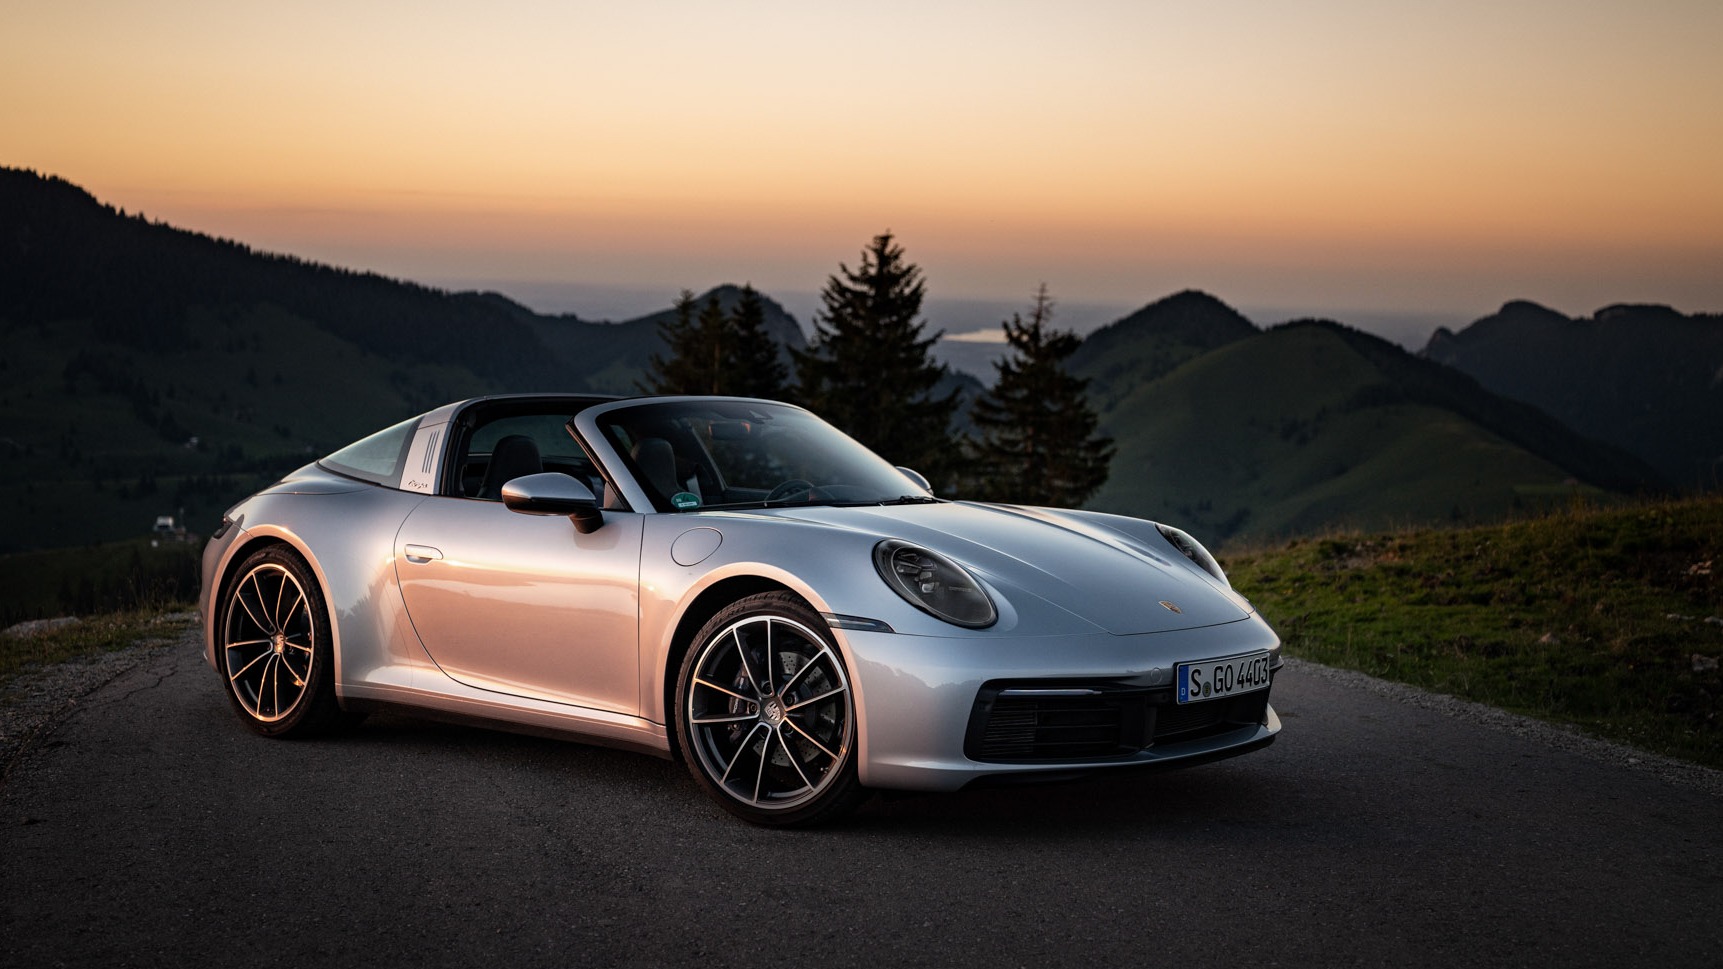 The New Porsche Targa Is This The Greatest 911 Yet Financial Times